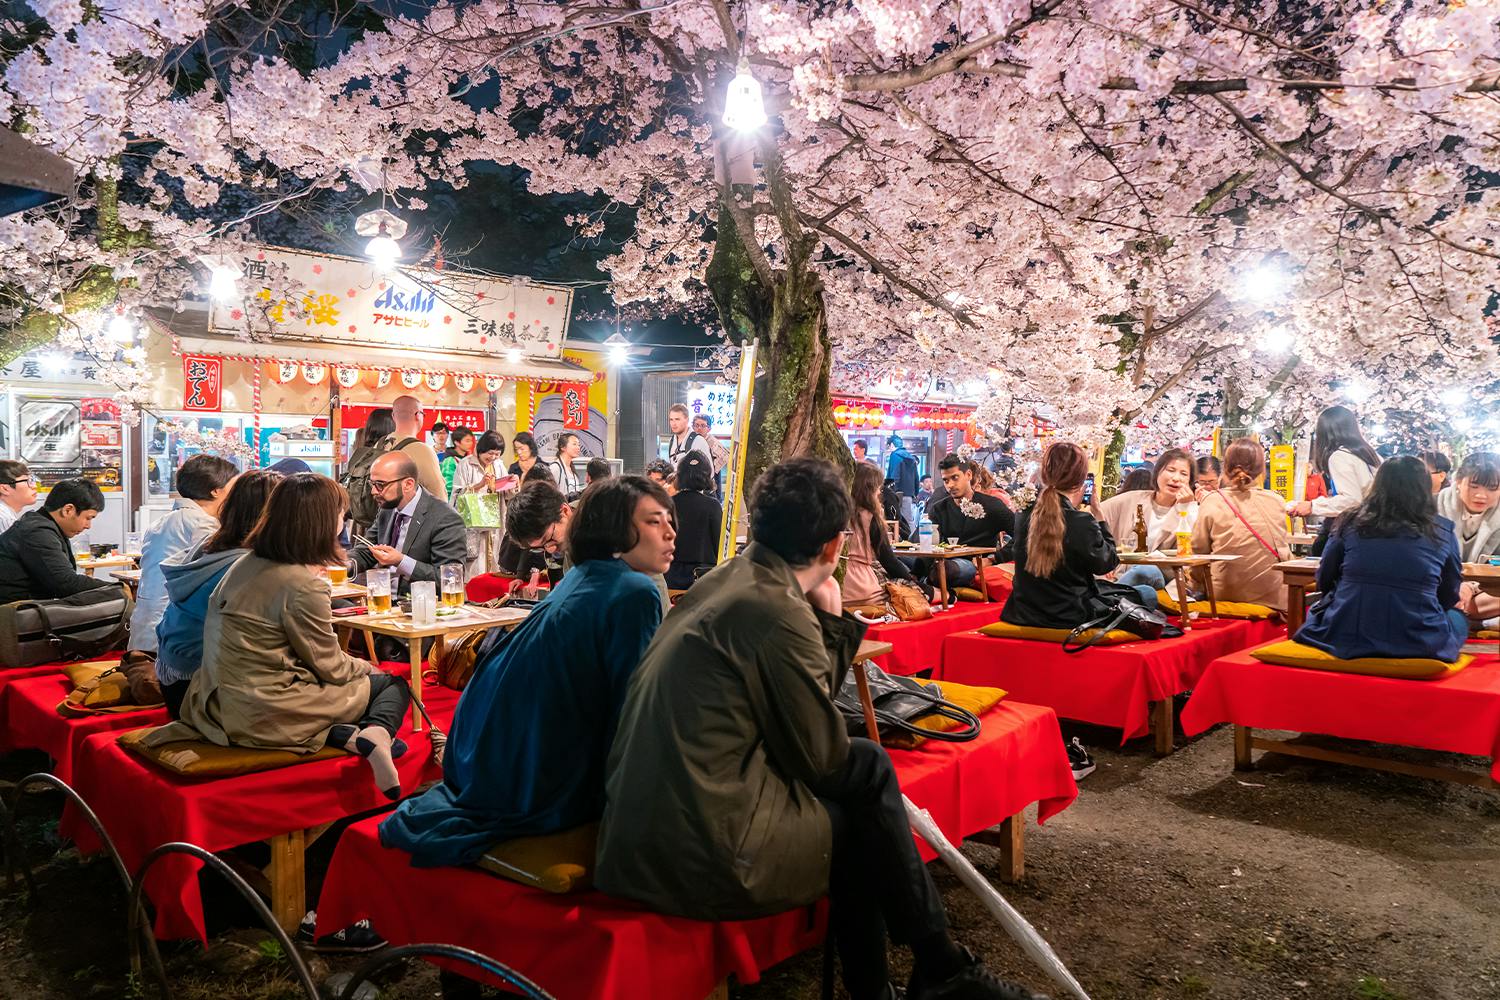 A sakura night time matsuri festival is displayed, along with festival attendees, sakura trees, and bright lights and food stalls.